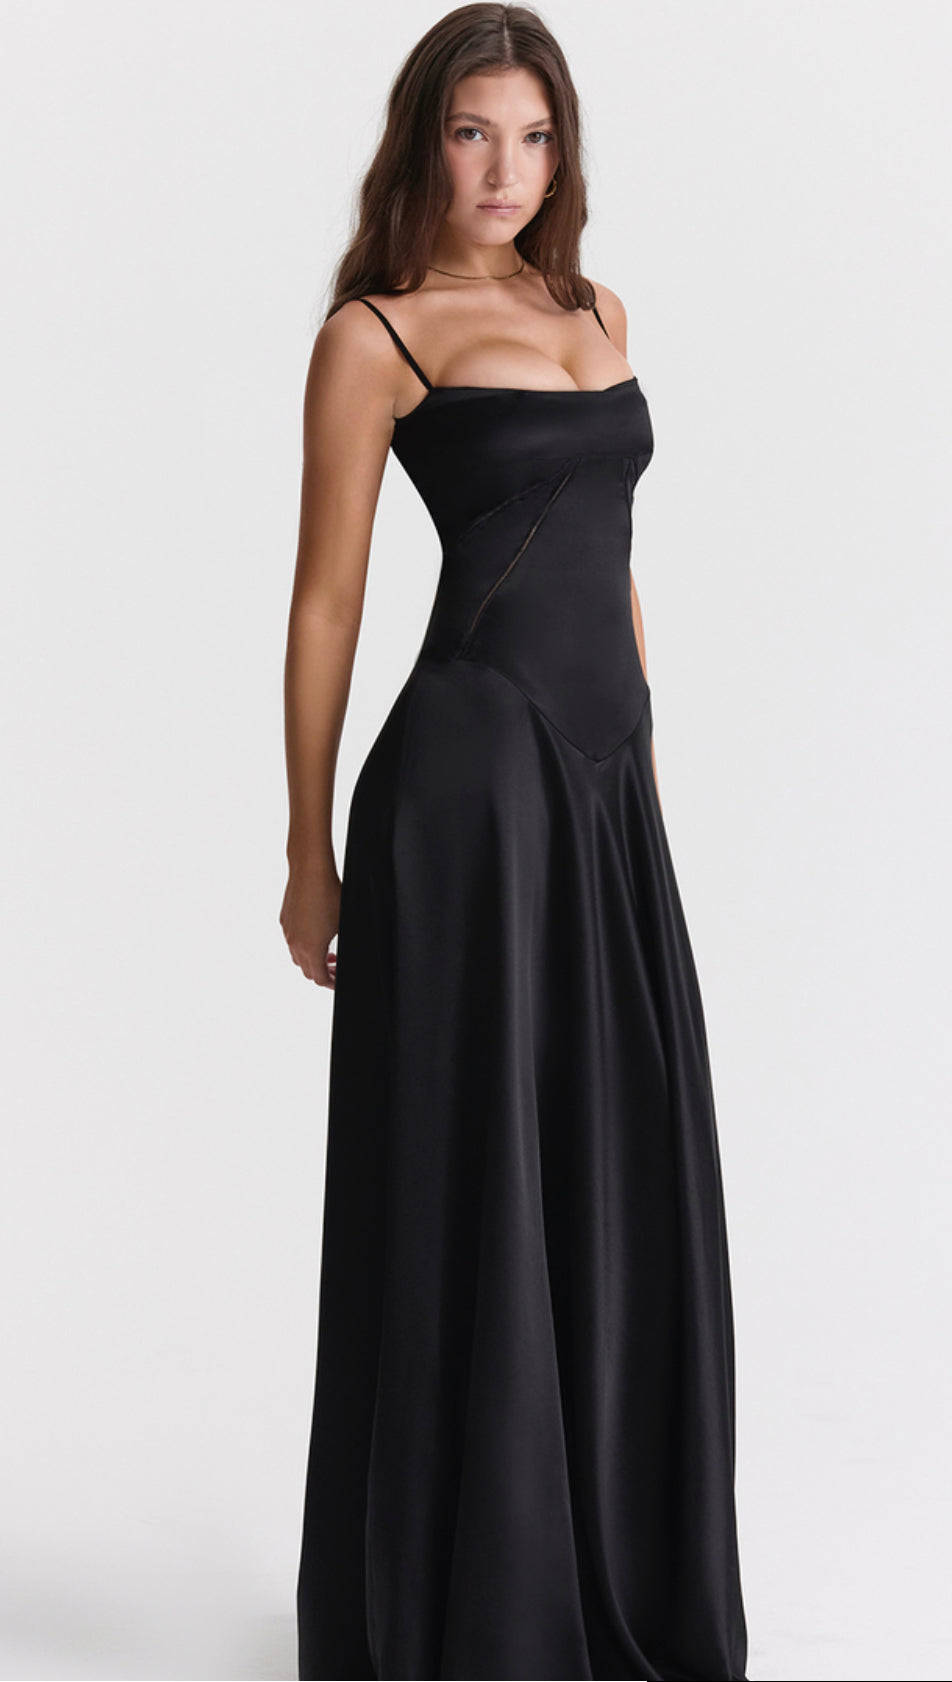 House of CB black satin dress rental Annabella. Front angled view with white background